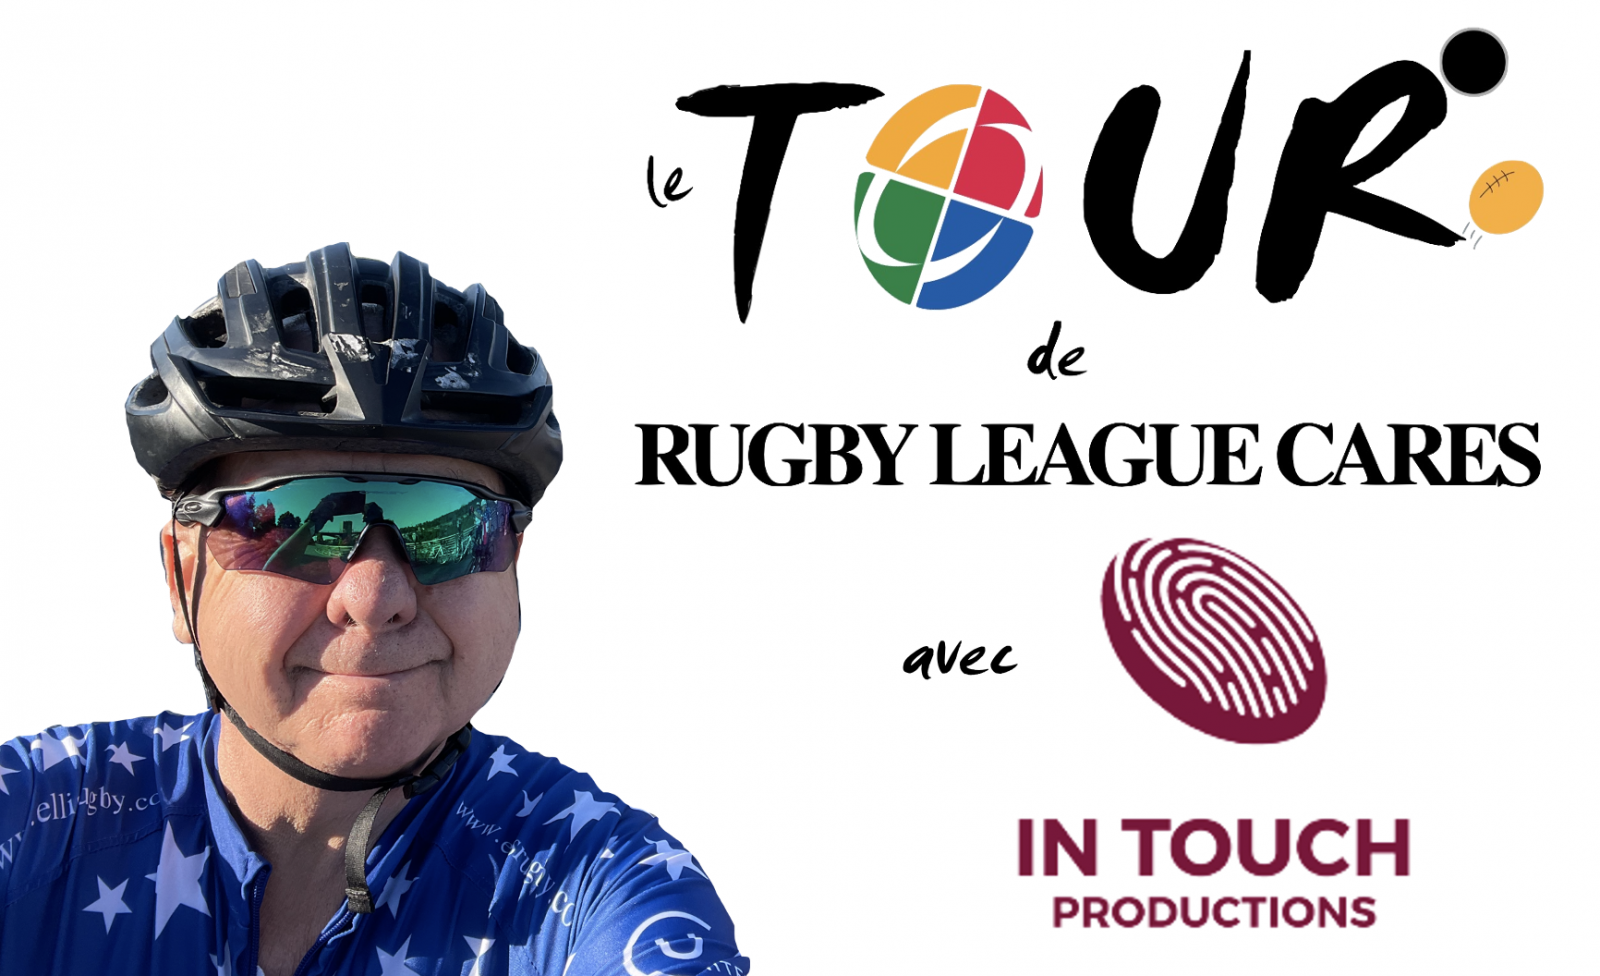 In Touch Productions become Media Partners of le Tour de Rugby League Cares